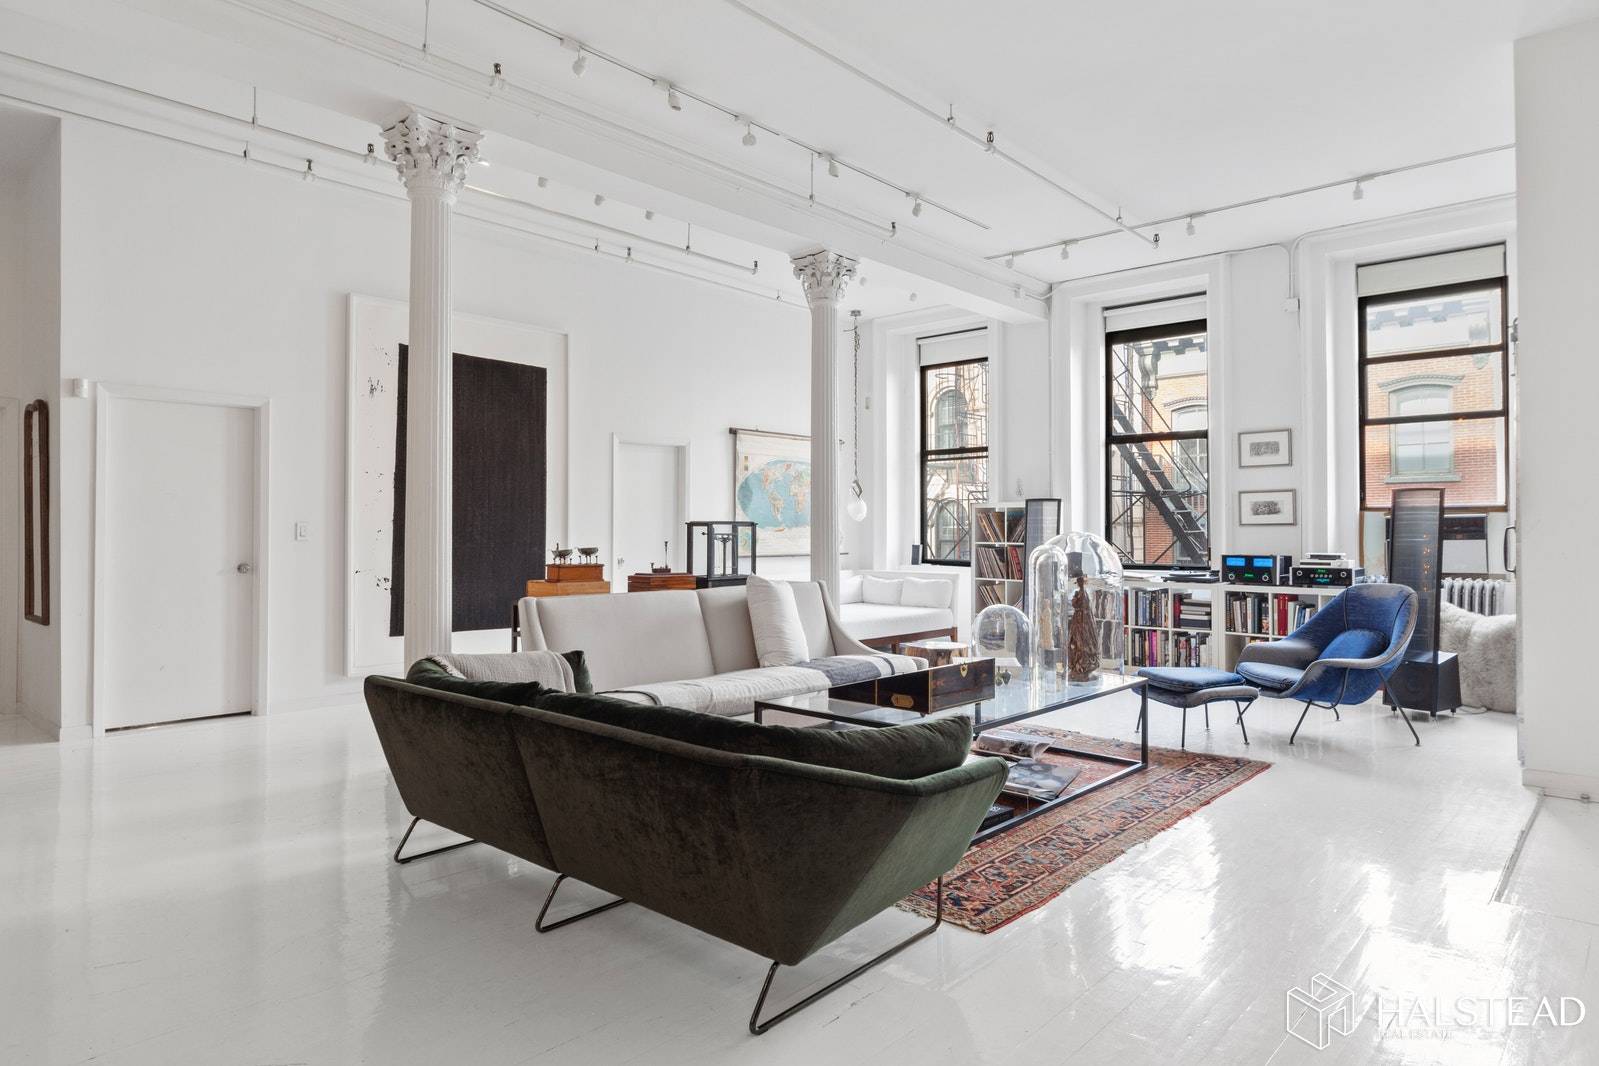 Step off the elevator into a wonderfully designed, dramatic square shaped loft, perfect for living entertaining, or shares, in a classic Tribeca cast iron loft building.